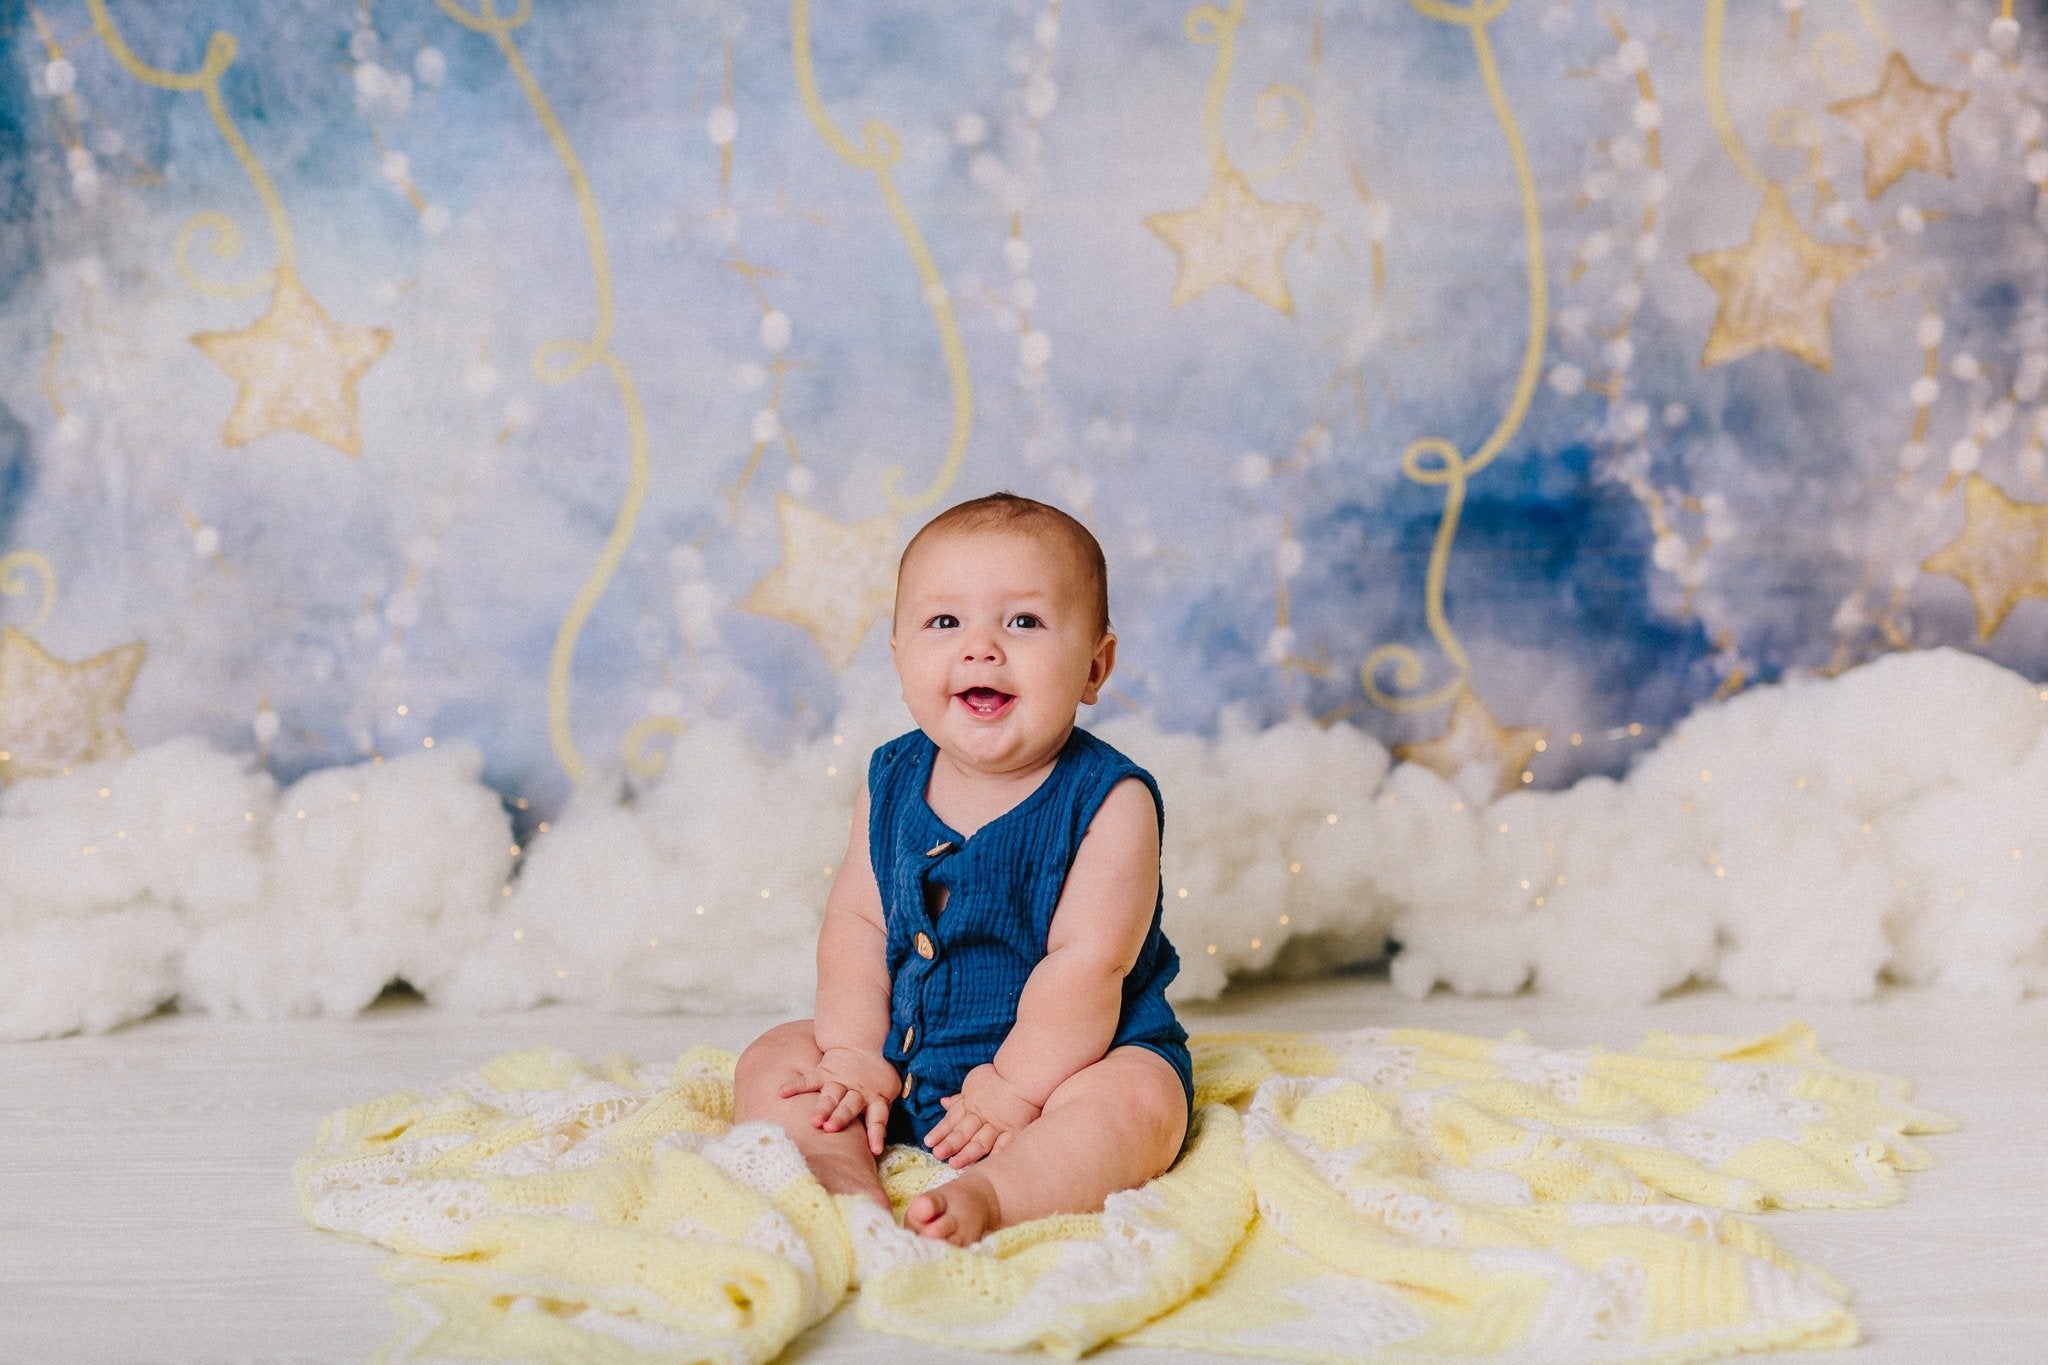 Kate Starry Night Light Star Backdrop for Photography Designed by Modest Brushes